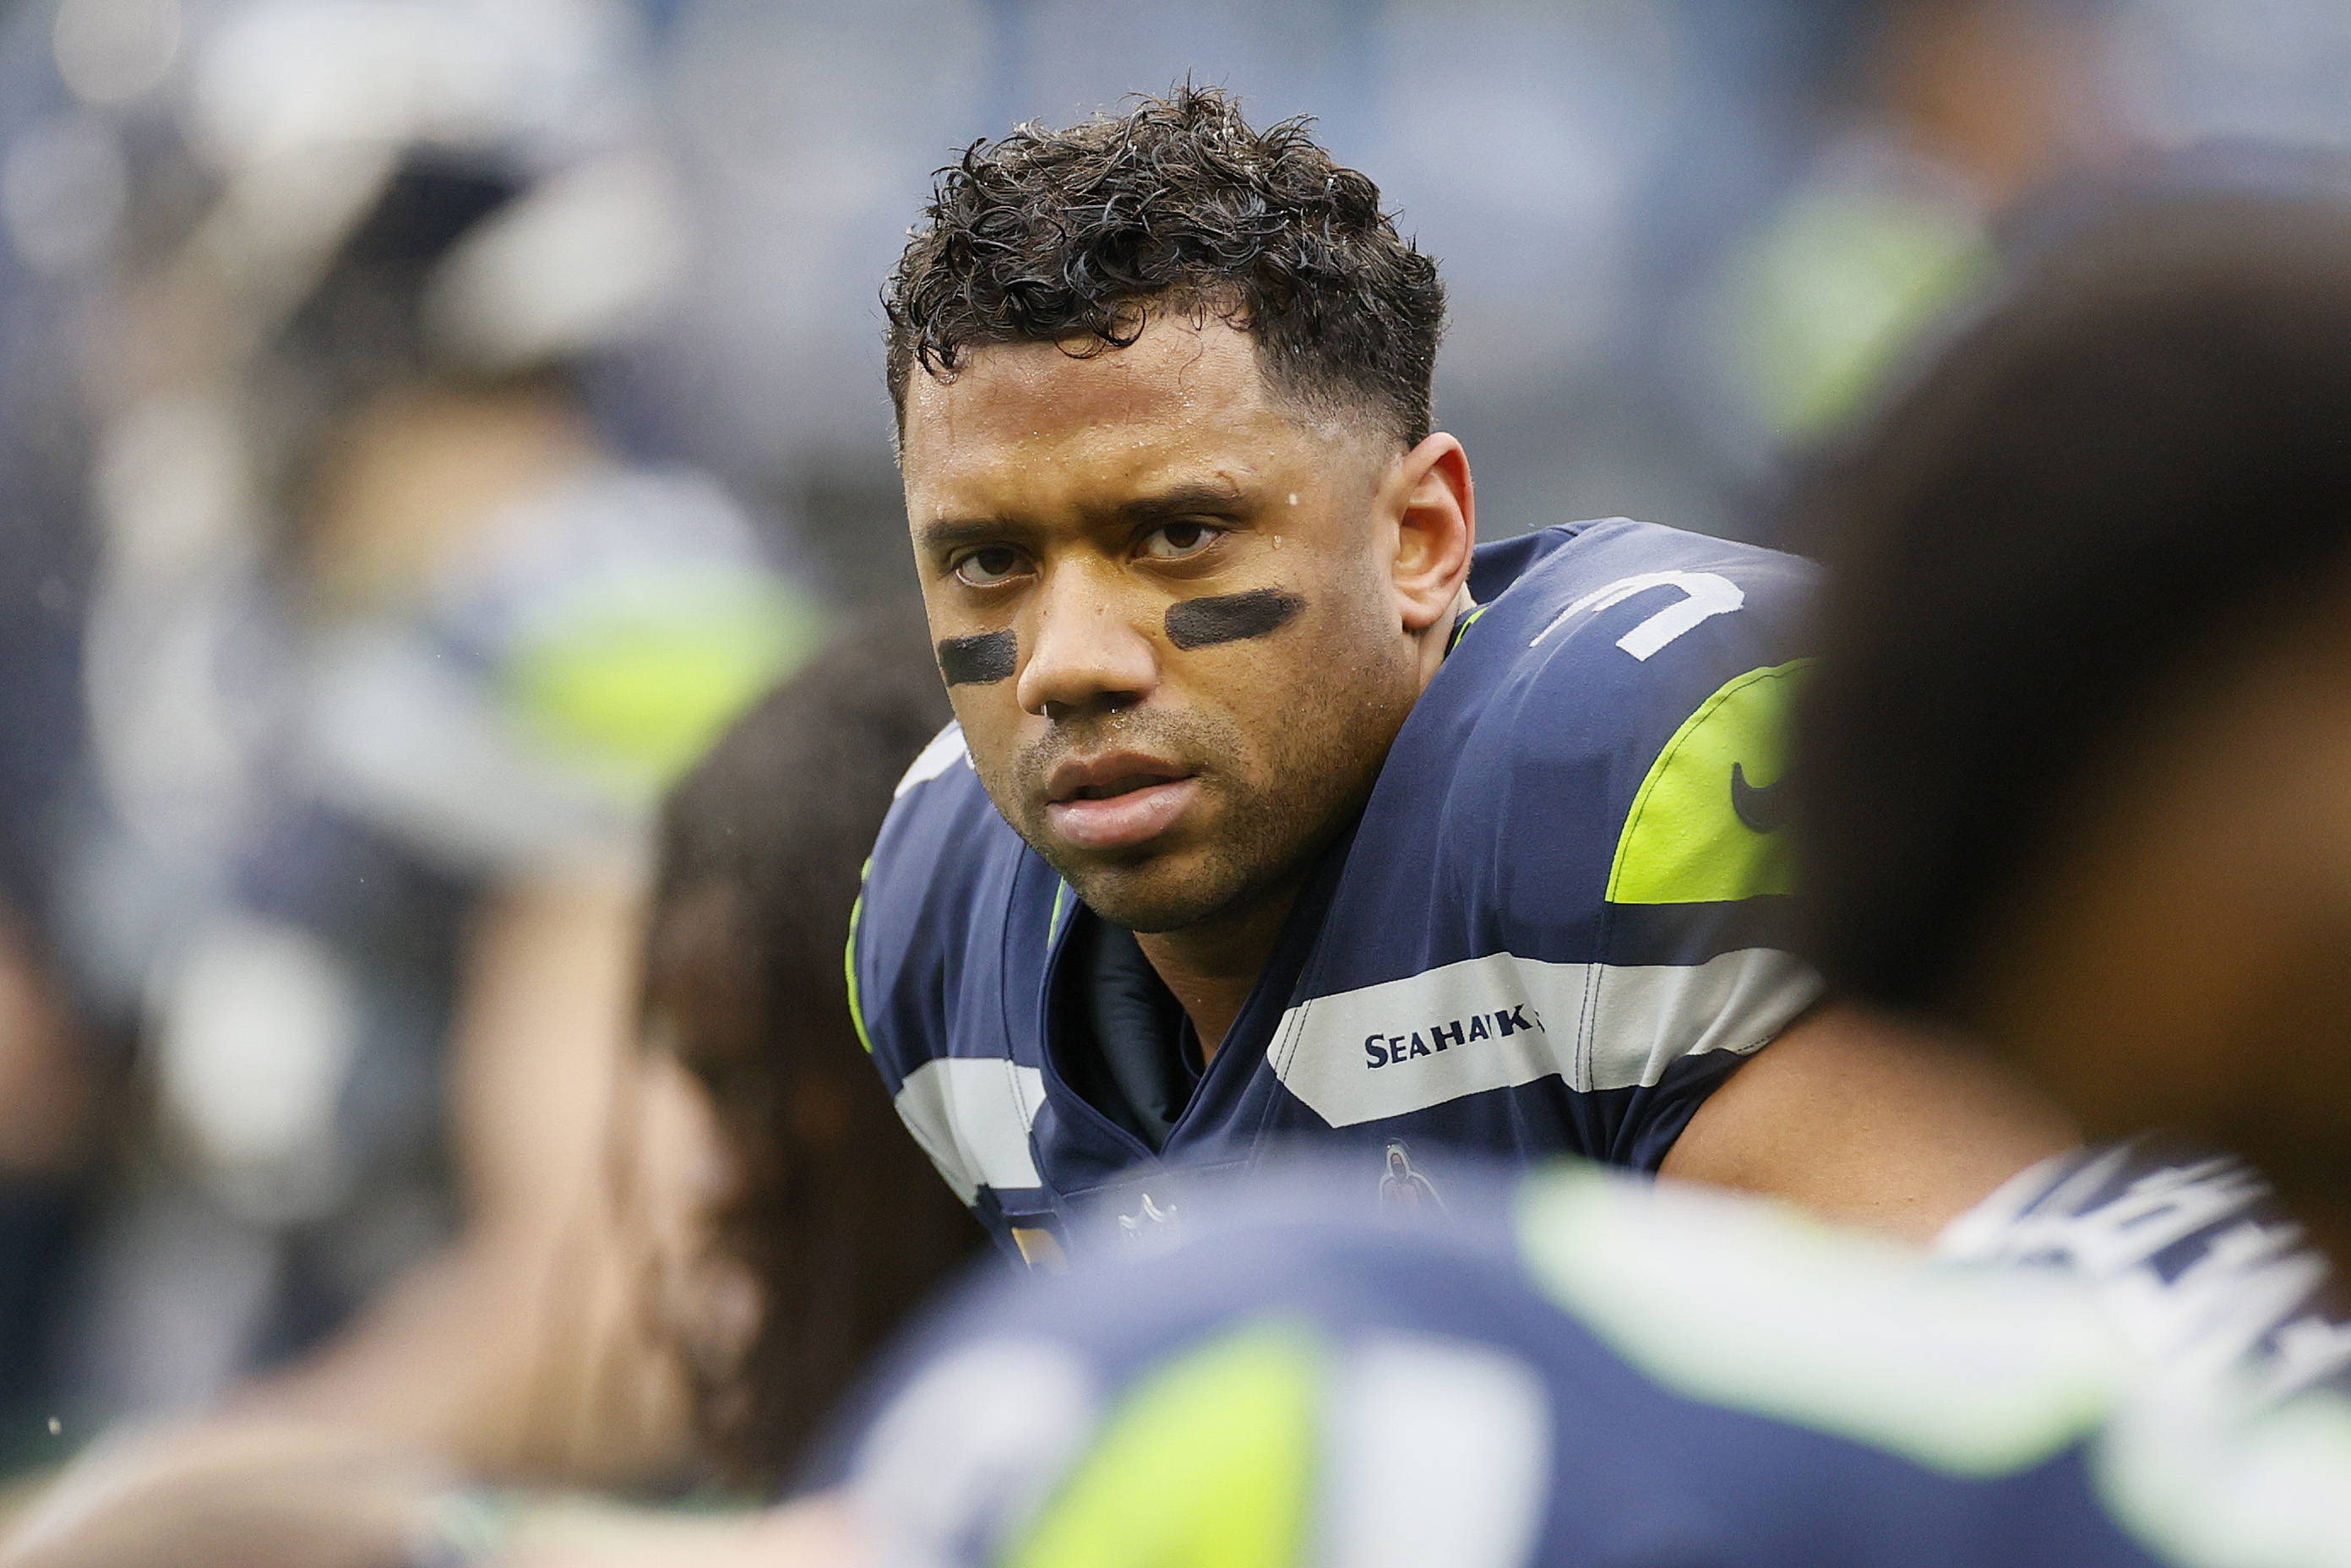 Seahawks QB Russell Wilson reacts during game against the Lions